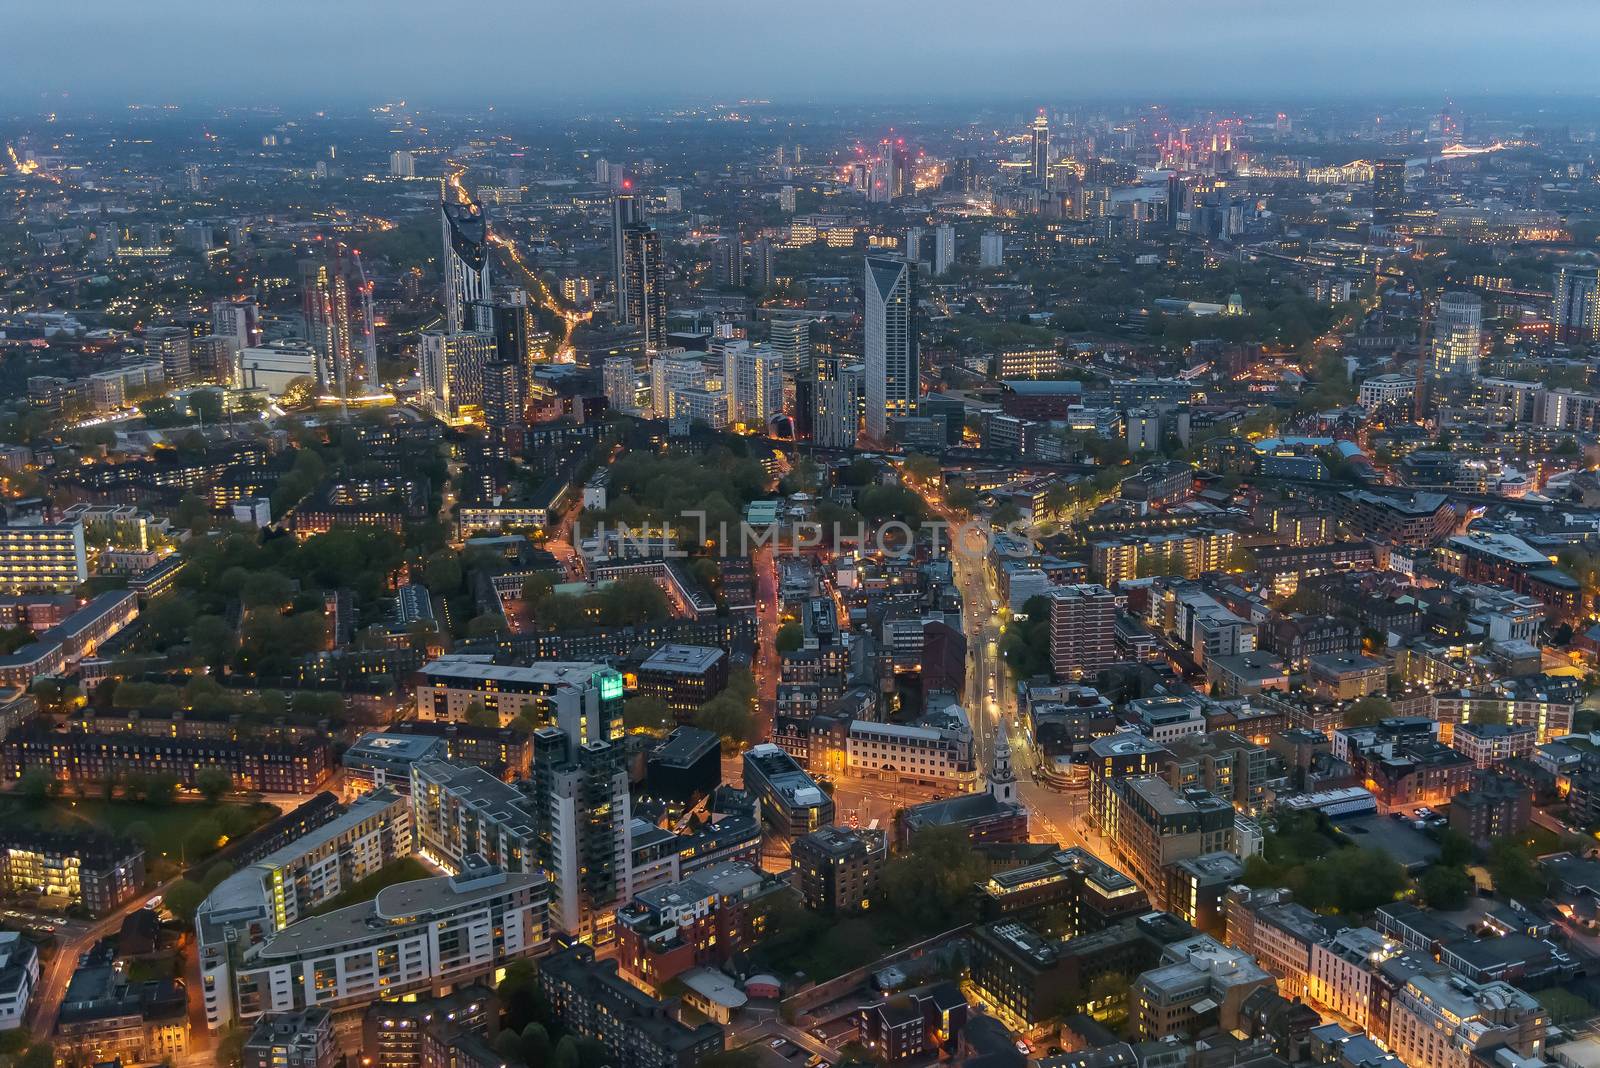 Aerial view of Southwark district in London at dusk by mkos83